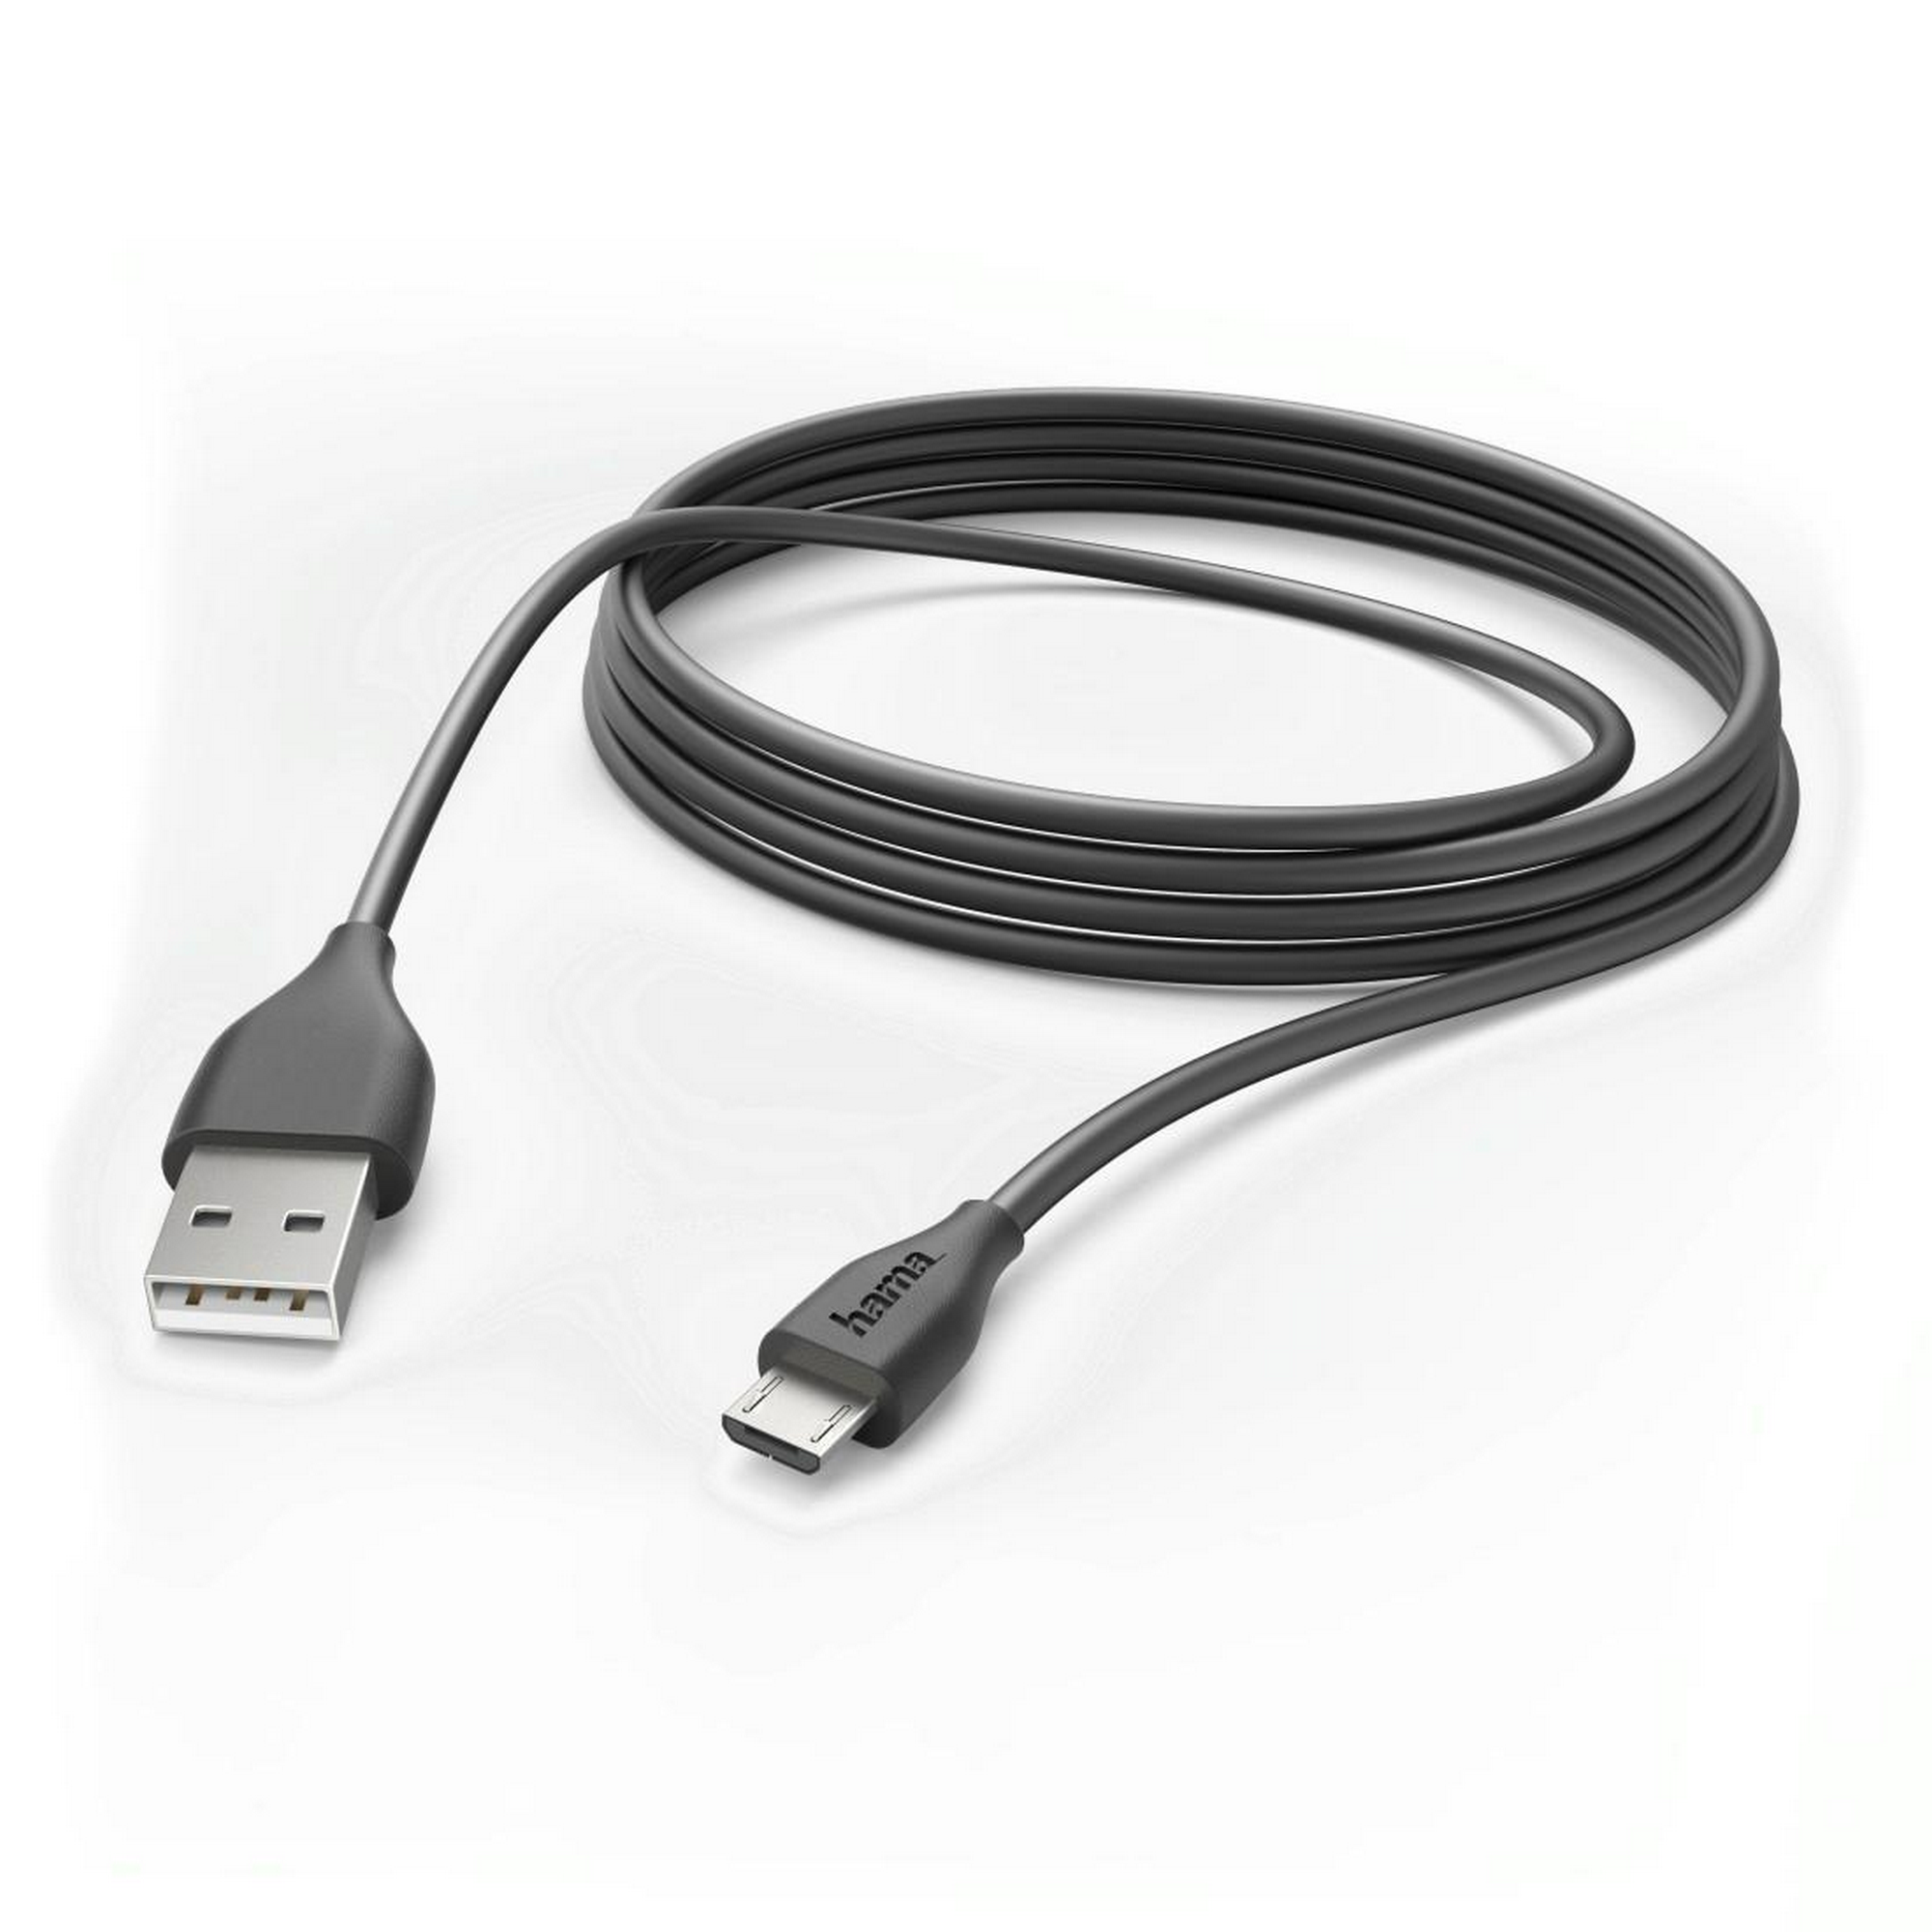 Lade-/Datenkabel schwarz Micro-USB 3 m + product picture